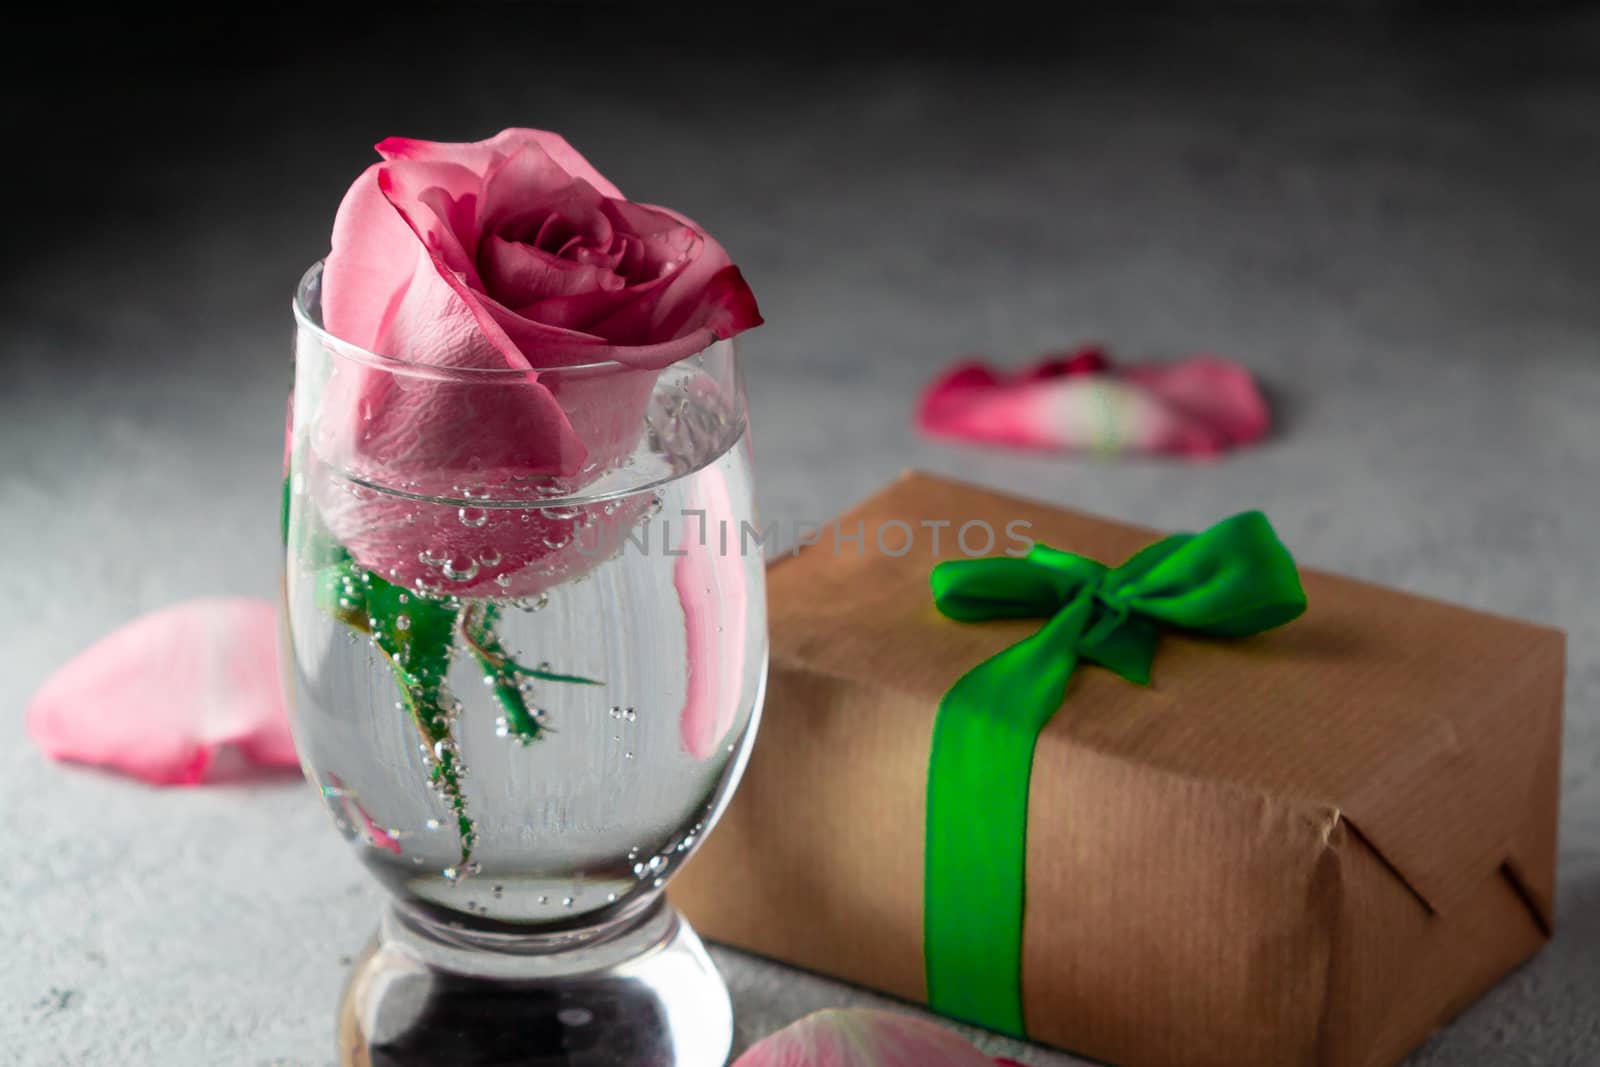 Pink rose in a glass of water, rose petals and a box with a gift on the table.